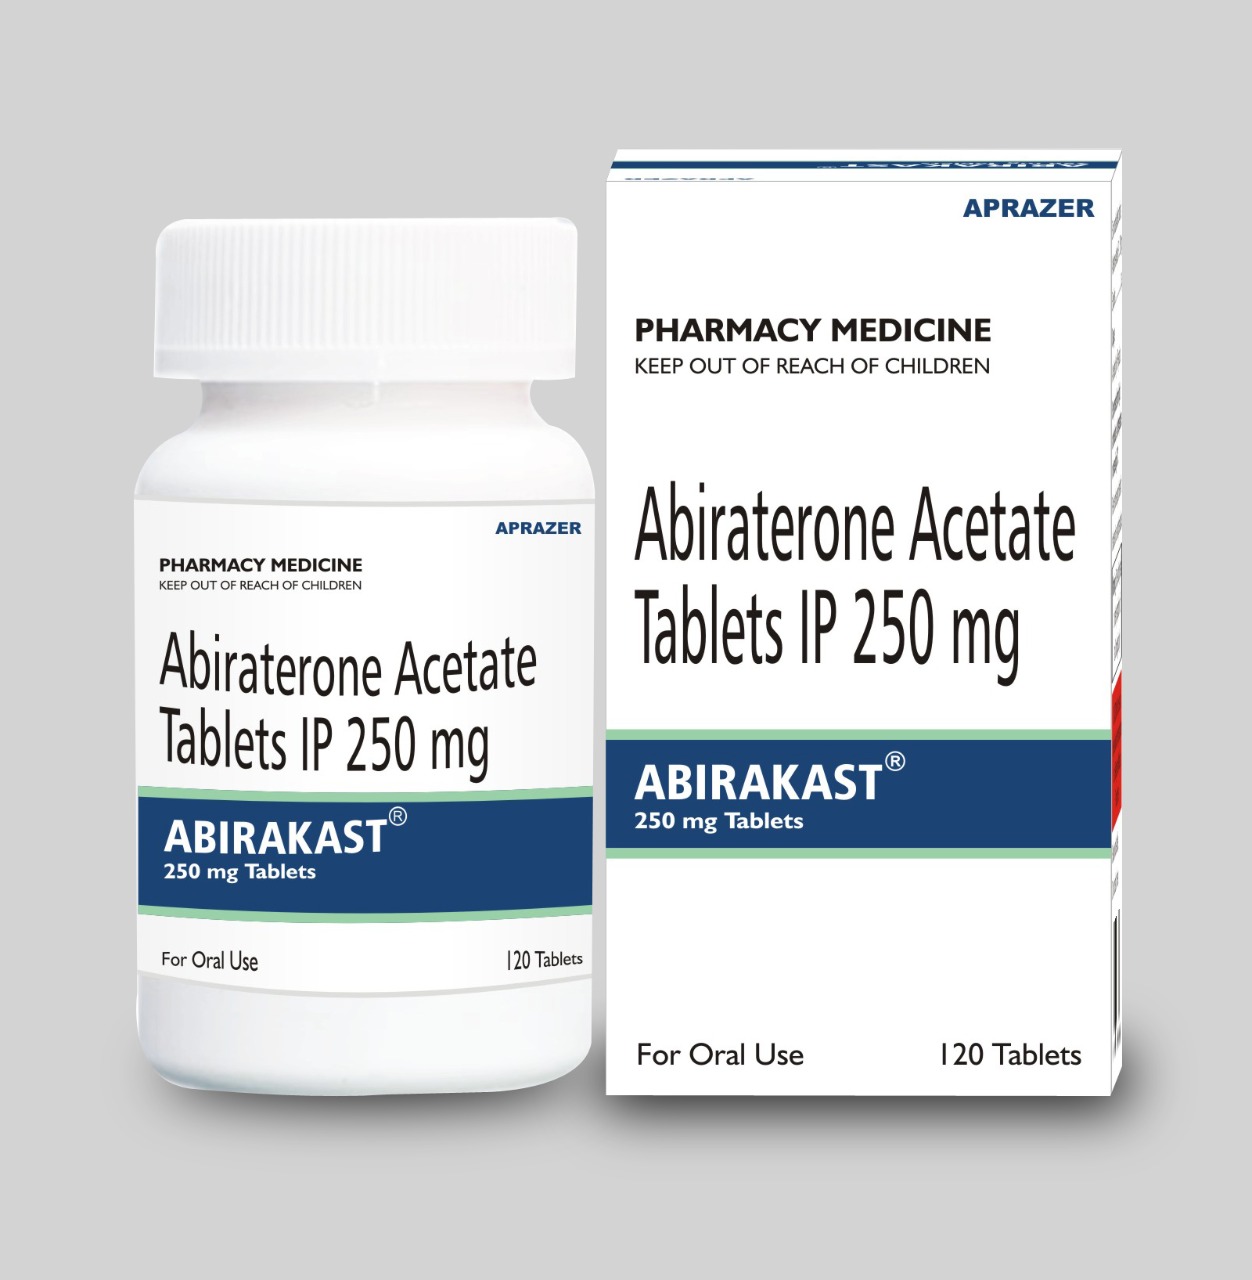 Enquiry for Abirakast Abiraterone Acetate Tablets IP 250 mg from India - Emedkit